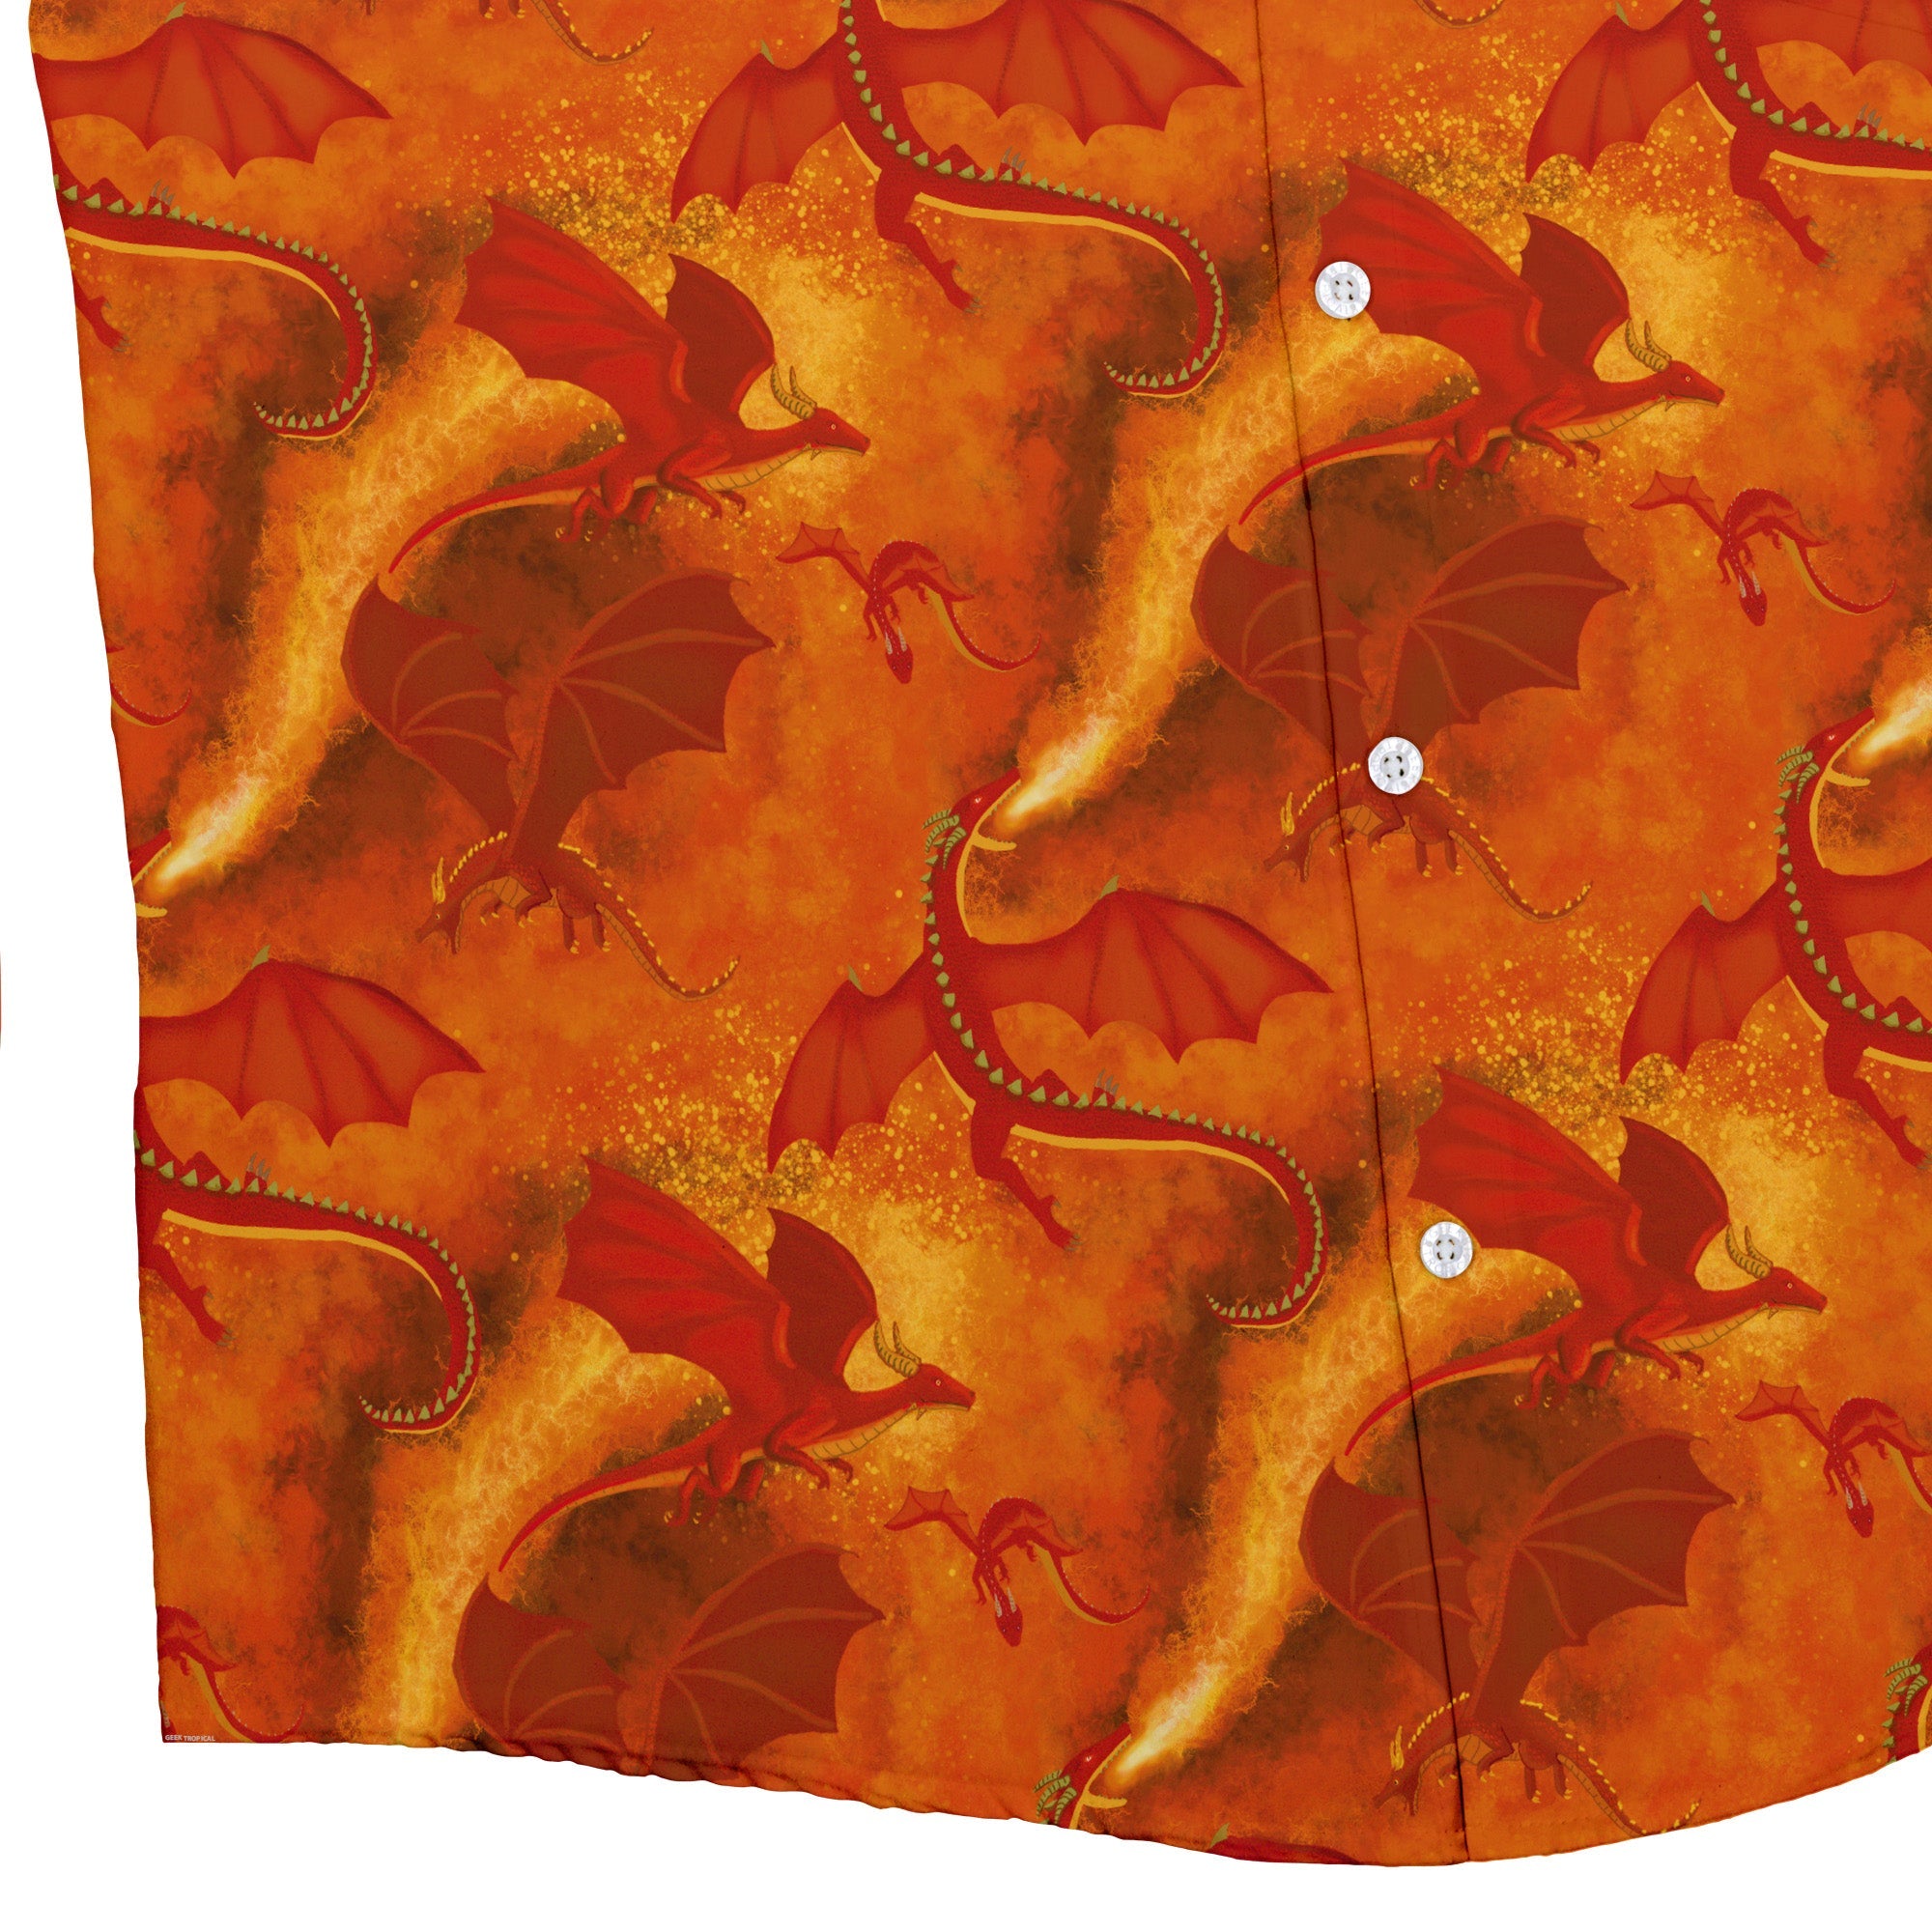 Red Dragon Fire Dnd Button Up Shirt - adult sizing - Animal Patterns - Designs by Nathan